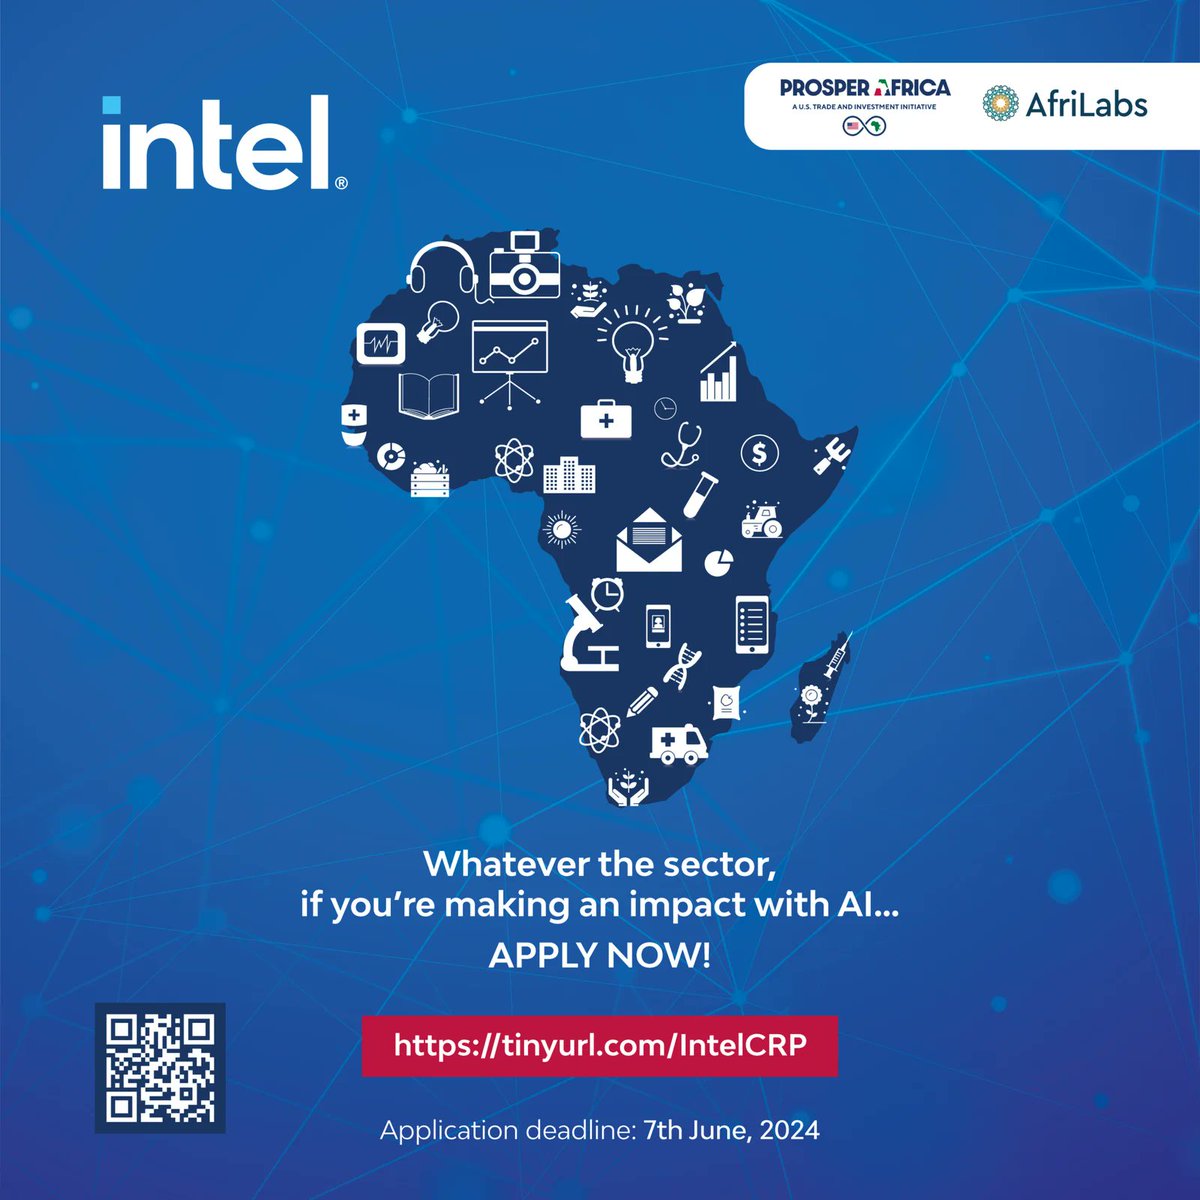 🌍 @Intel, @AfriLabs, and @ProsperAfricaUS are on a mission to harness the power of AI for positive change in various sectors. We're calling on innovators like you to submit your ideas in the following areas: 🎓 Education 🏥 Healthcare 🌾 Agriculture 💹 Fintech 📈 Digital